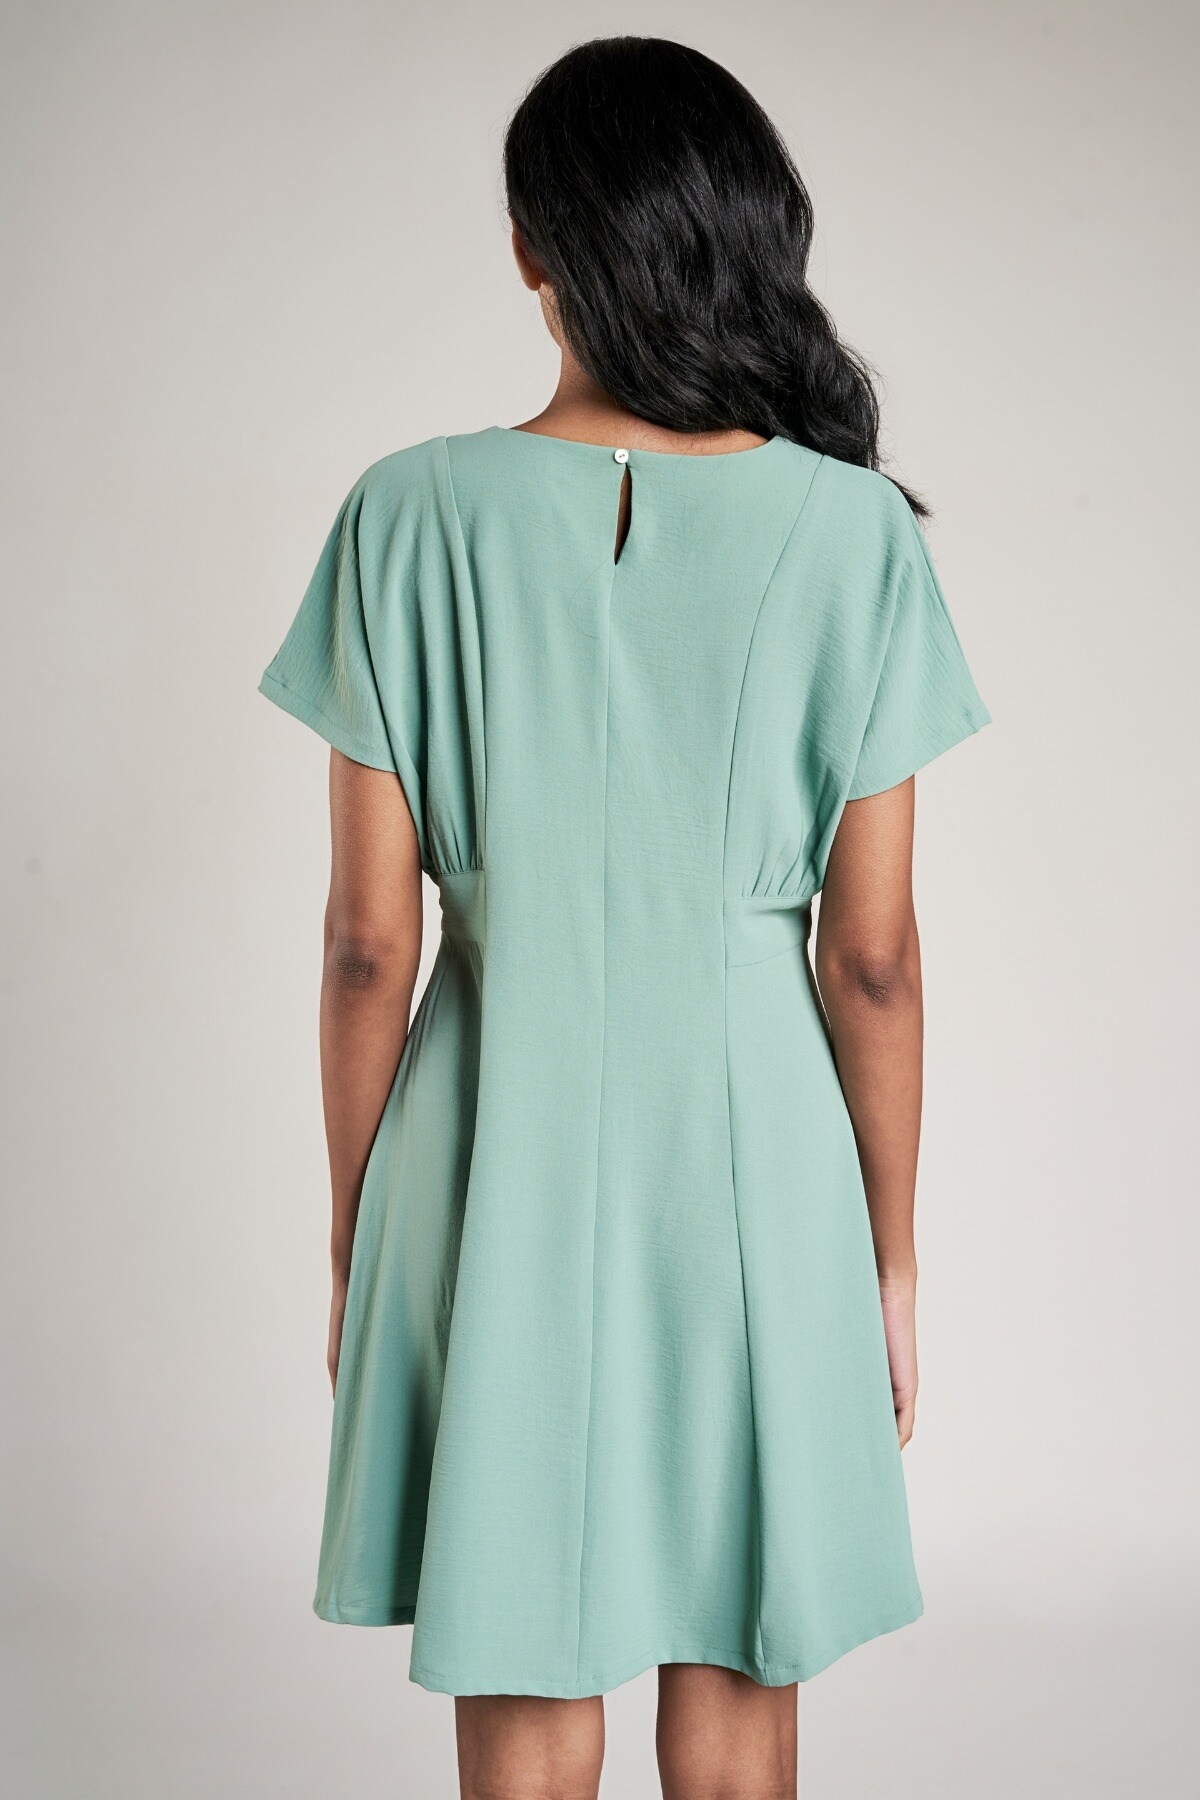 AND | AND SAGE GREEN DRESS 2